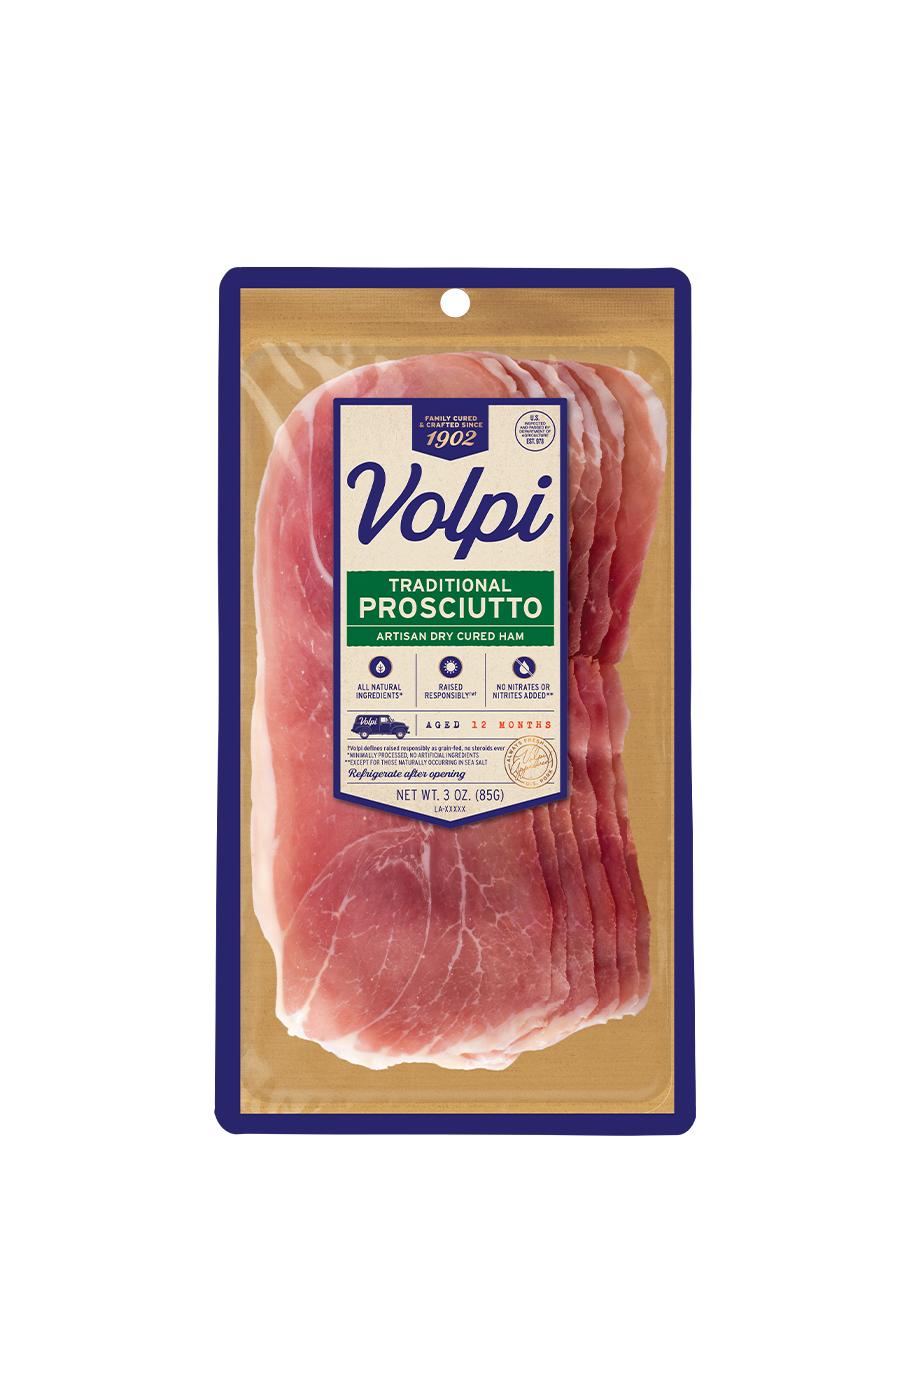 Volpi Sliced Traditional Prosciutto; image 1 of 4